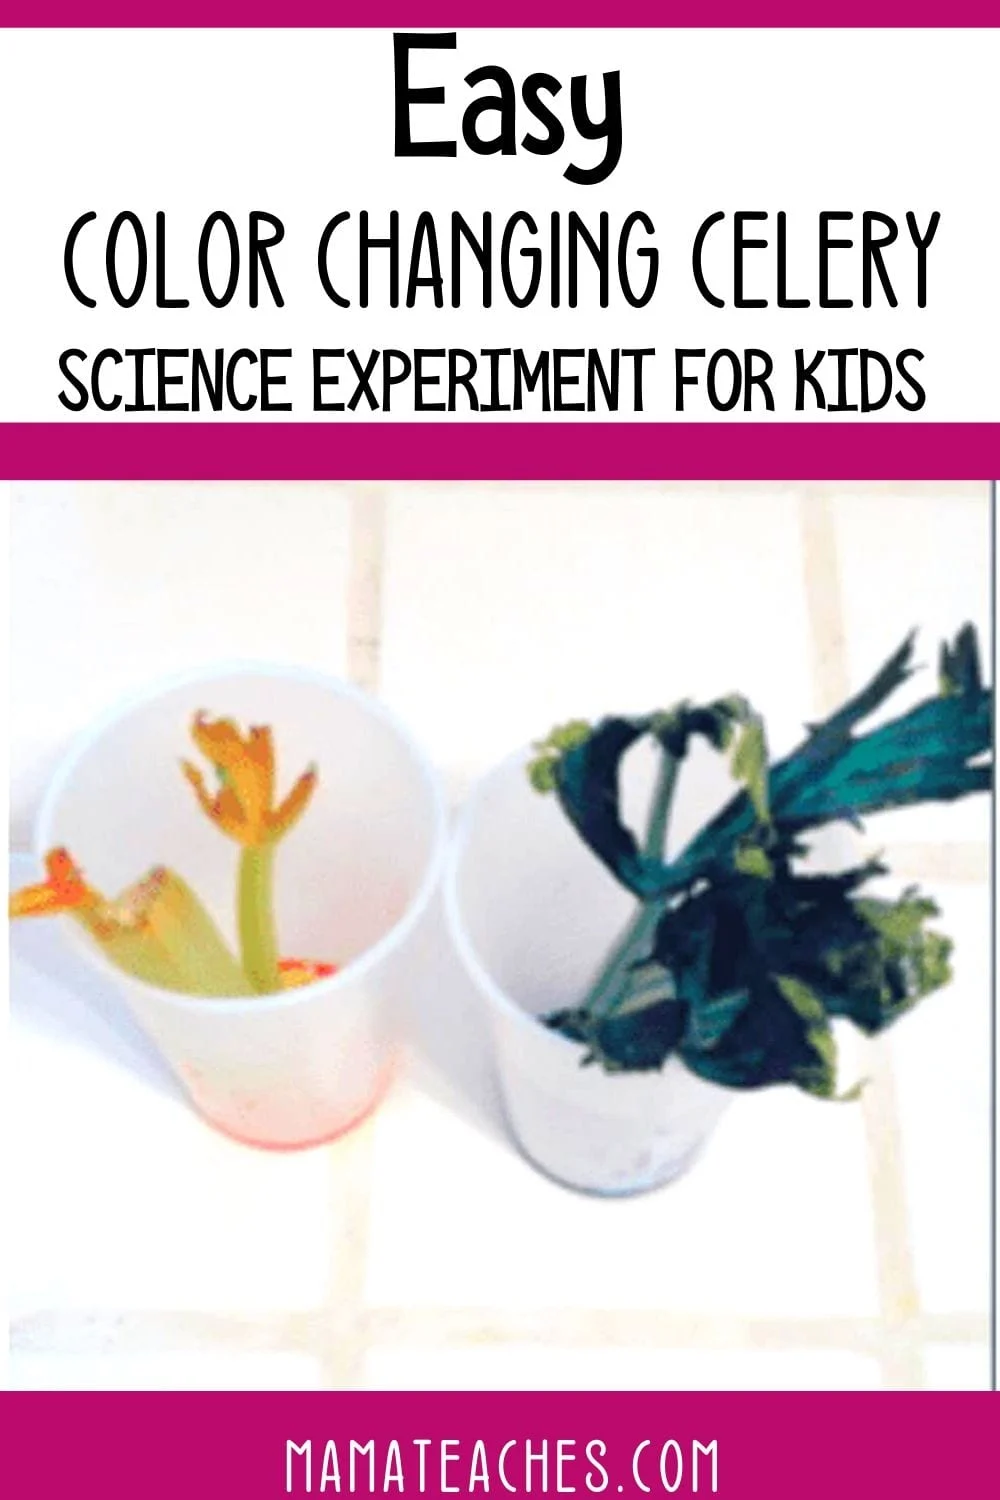 Color Changing Celery Experiment for Kids - an Easy STEM Experiment for Lower Elementary - FREE Tracking Sheet Included - MamaTeaches.com